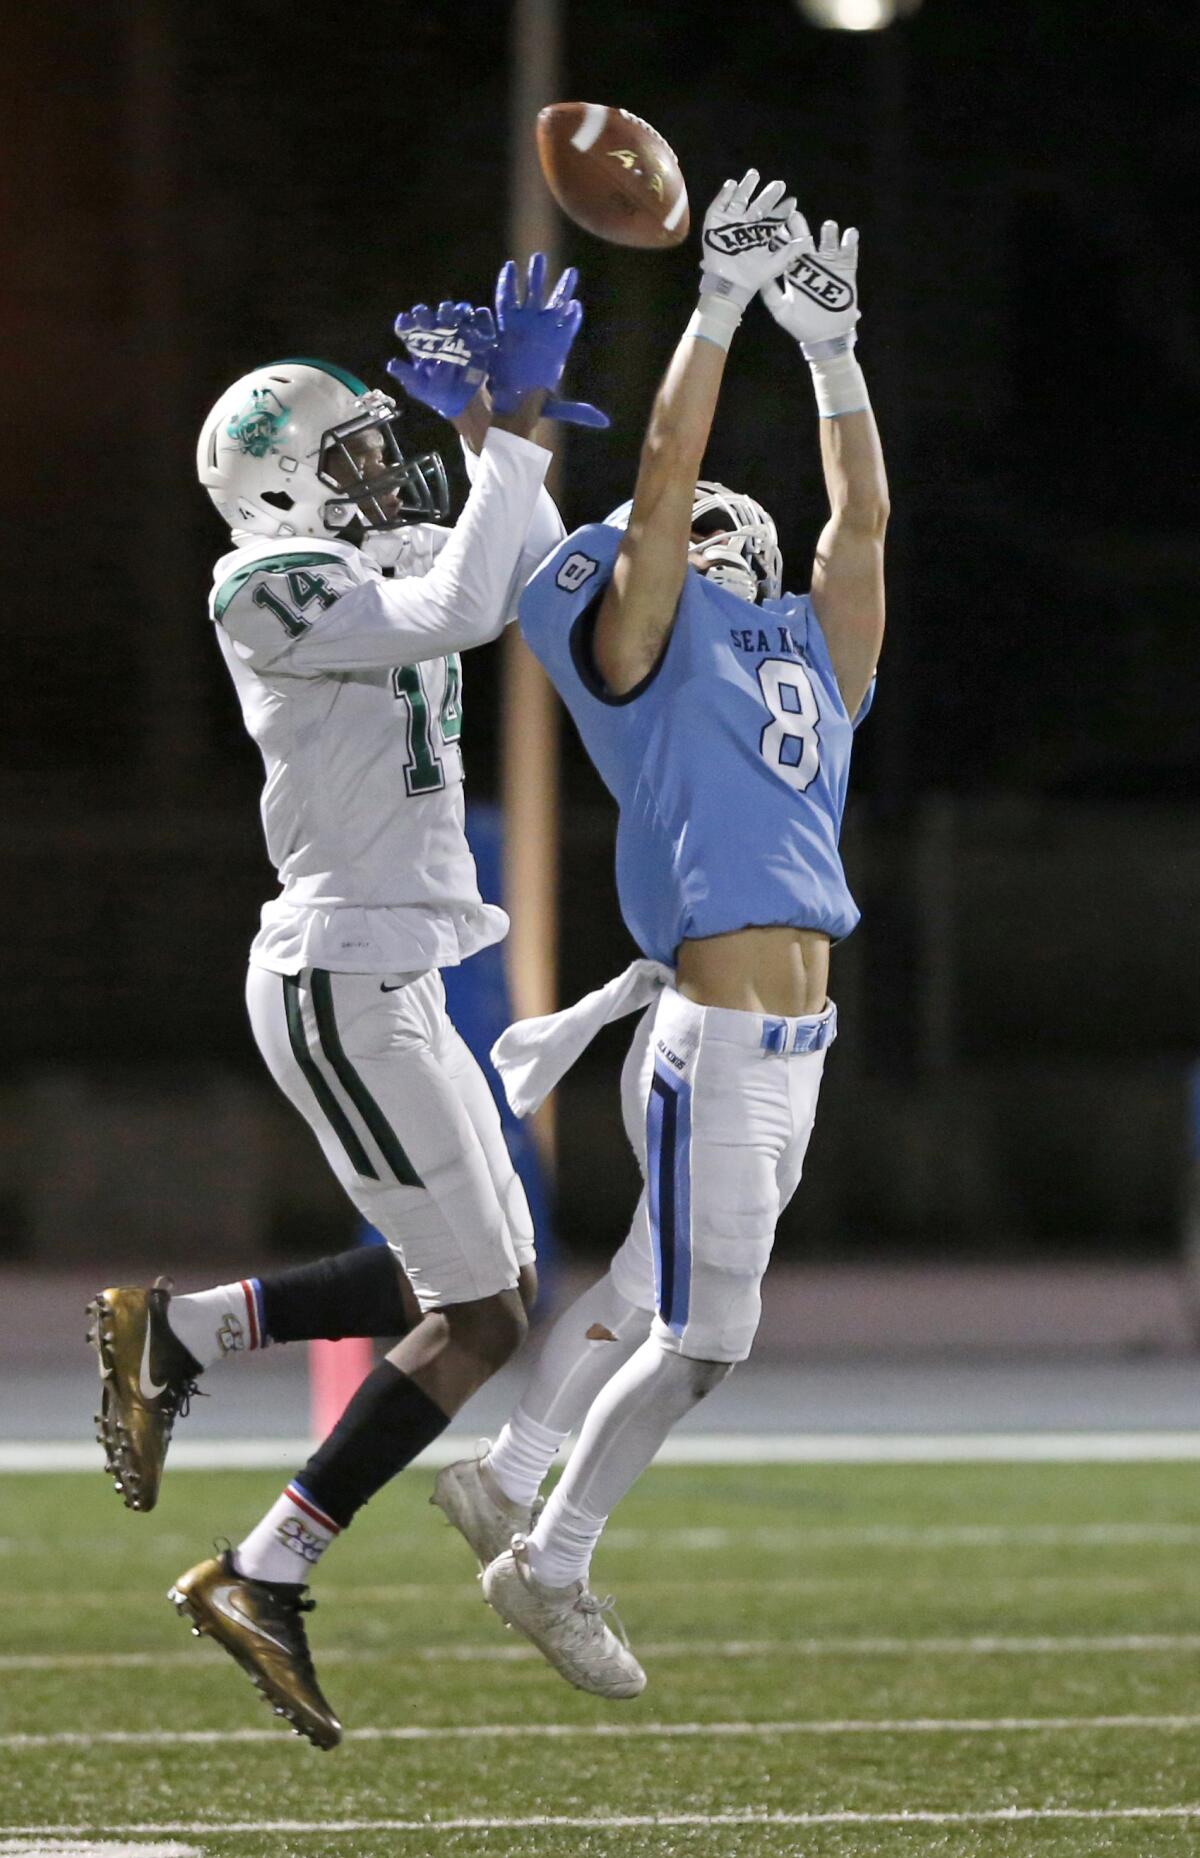 Corona del Mar's Ryder Haupt breaks up a pass intended for Oceanside's Nicholas Williams in the CIF State Southern California Regional Division 1-A Bowl Game on Saturday at Newport Harbor High.